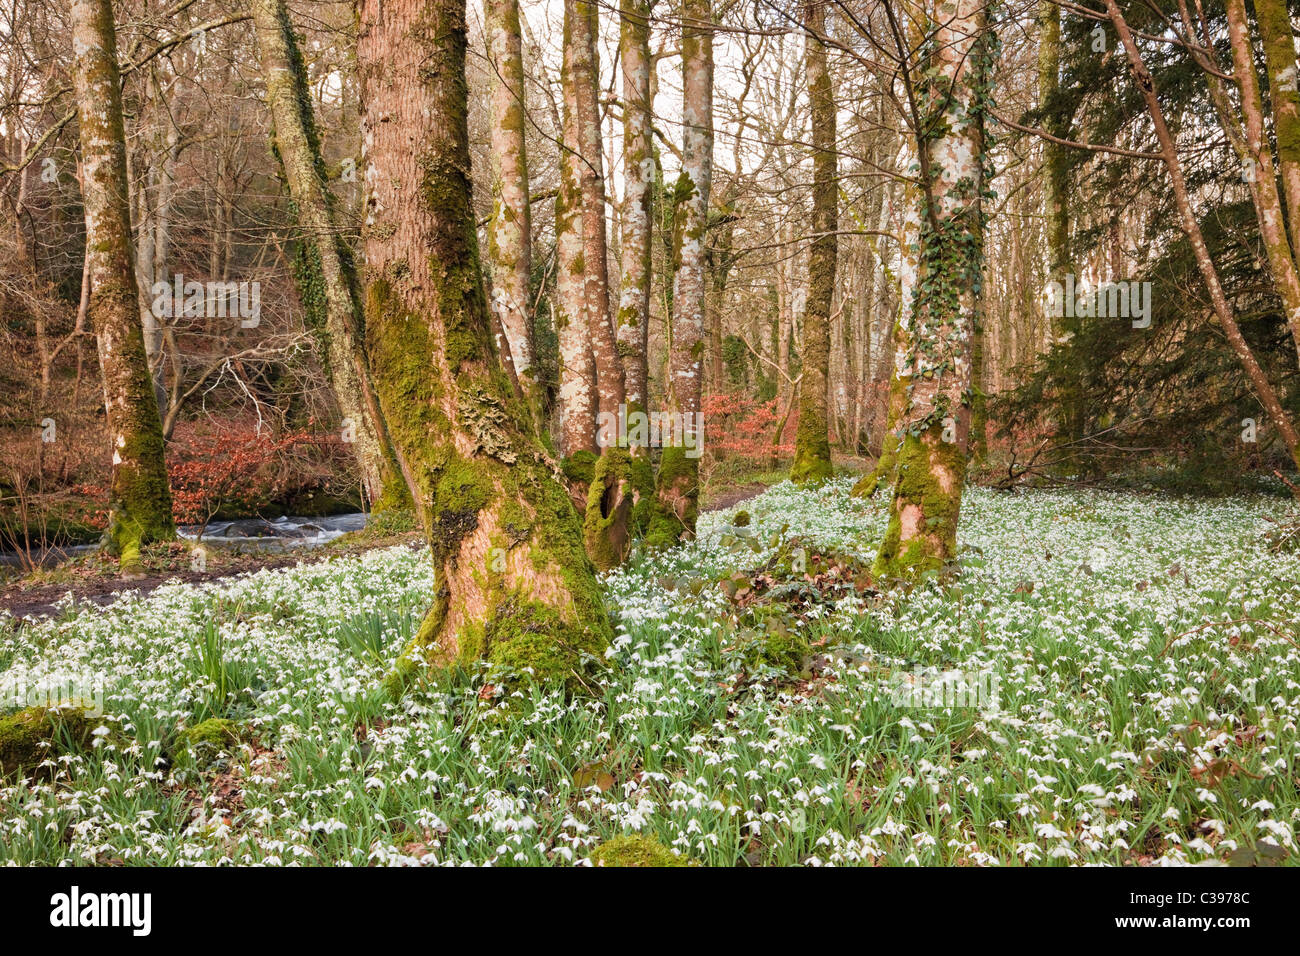 Wild Snowdrops (Galanthus nivalis) growing in deciduous woodland beside Afon Dwyfor River in late winter. Gwynedd, North Wales, UK, Britain. Stock Photo